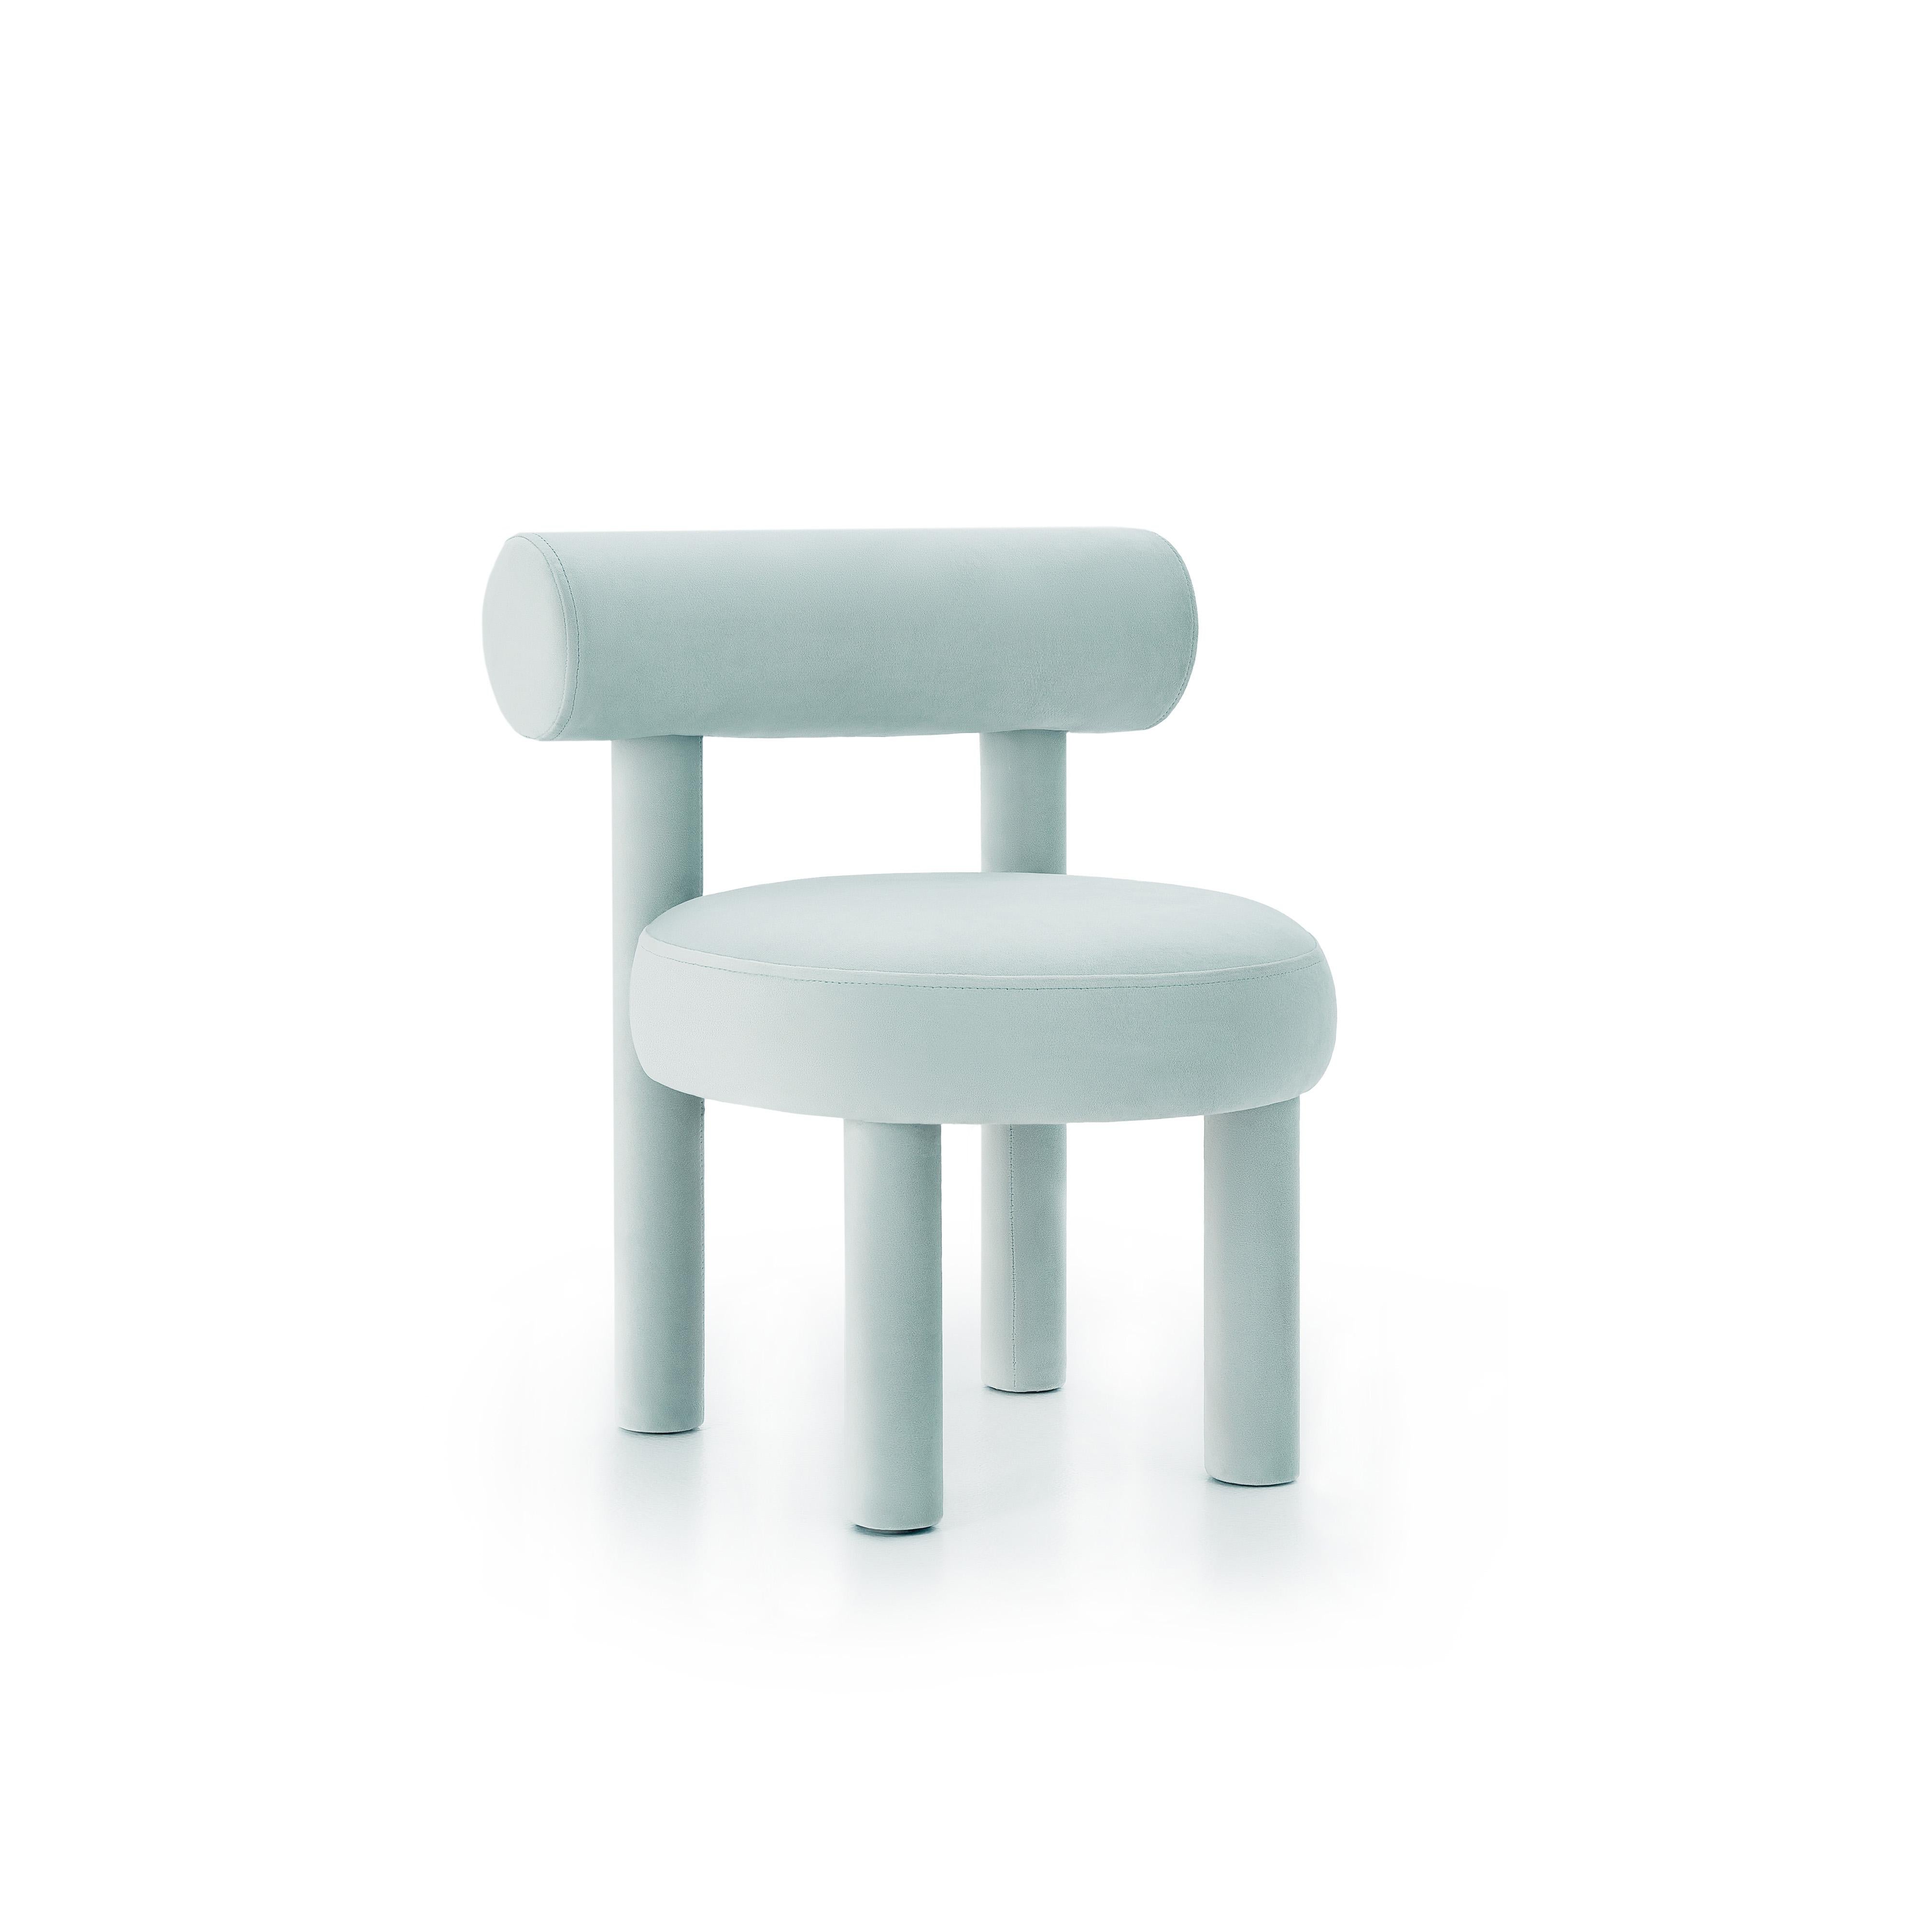 Baby Chair 'Gropius CS1' by Noom
Model in picture: Magic Velvet 2237
Designer: Kateryna Sokolova

Dimensions: 
H 50 cm, W 40 cm, D 40 cm  seat height 30 cm

The Baby Gropius chair is designed in the same spirit as the collection's flagman Gropius